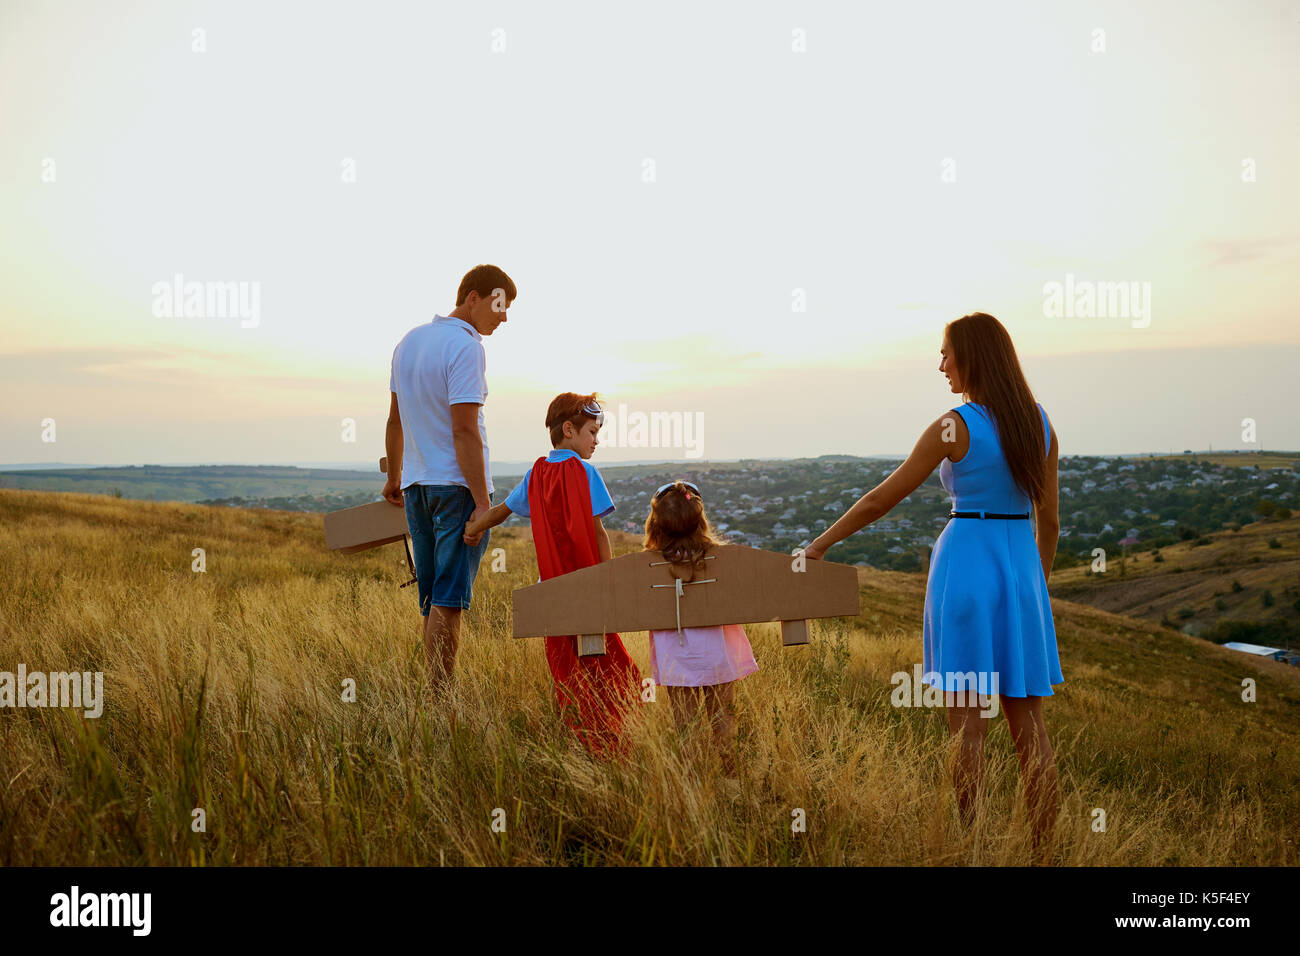 Family in the evening at sunset field in nature. Stock Photo